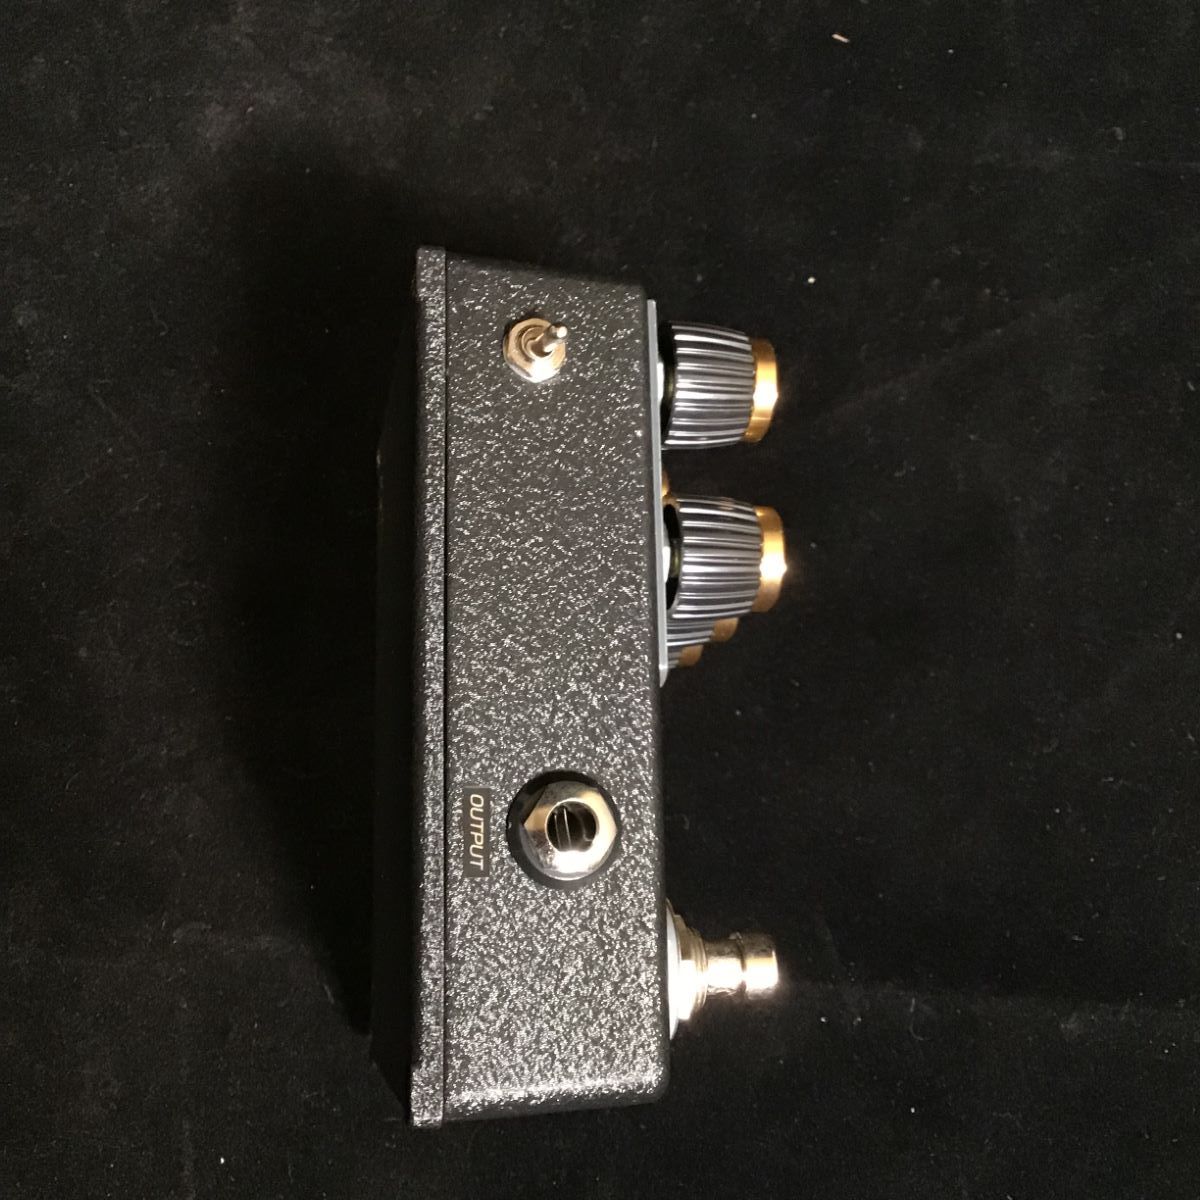 VERO CITY Effects Pedals 【中古】Spuer Lead Ultra ベロシティー